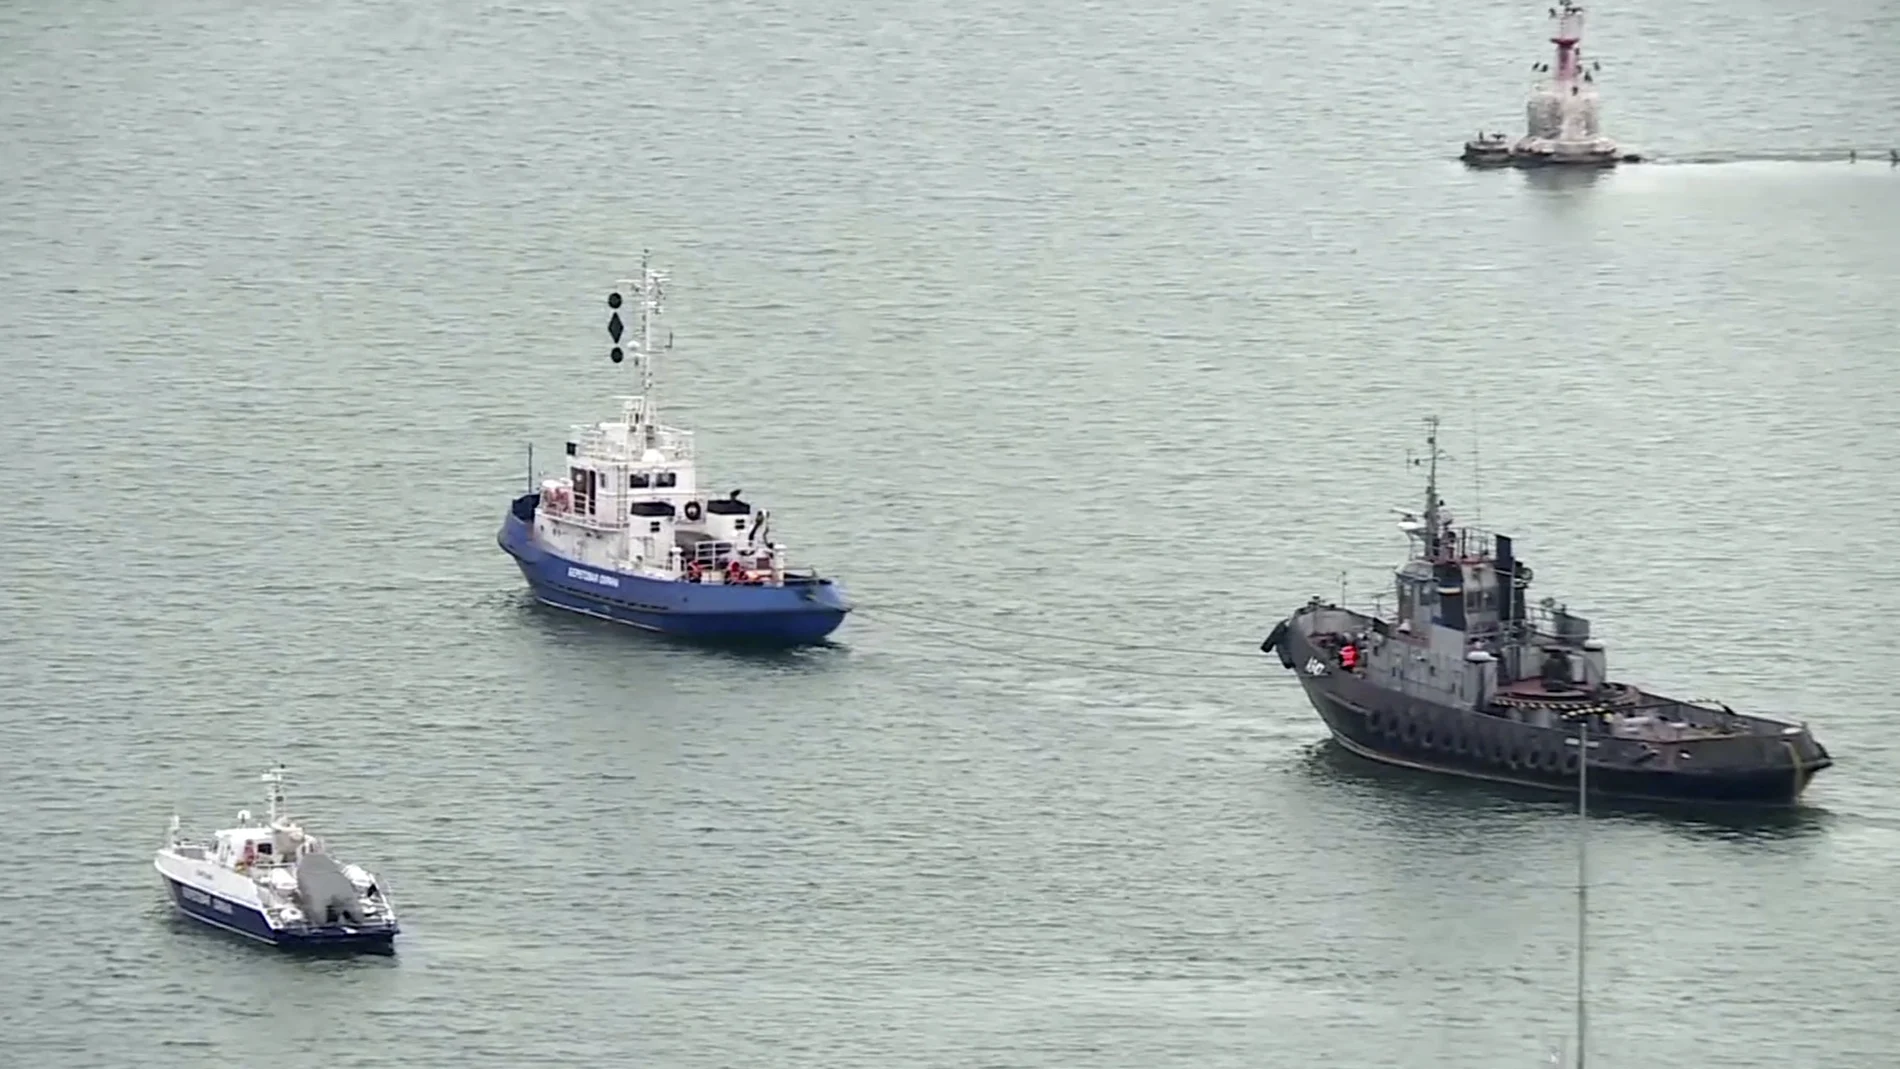 This video grab provided by the Krym 24 tv station via AP Television shows a seized Ukrainian ship, right, is towed by a Russian coast guard boat out of the port in Kerch, Crimea, Sunday, Nov. 17, 2019. Russia's Foreign Ministry says three Ukrainian naval ships that were seized in a shooting confrontation nearly a year ago have been returned. (Krym 24 tv station via AP Television)